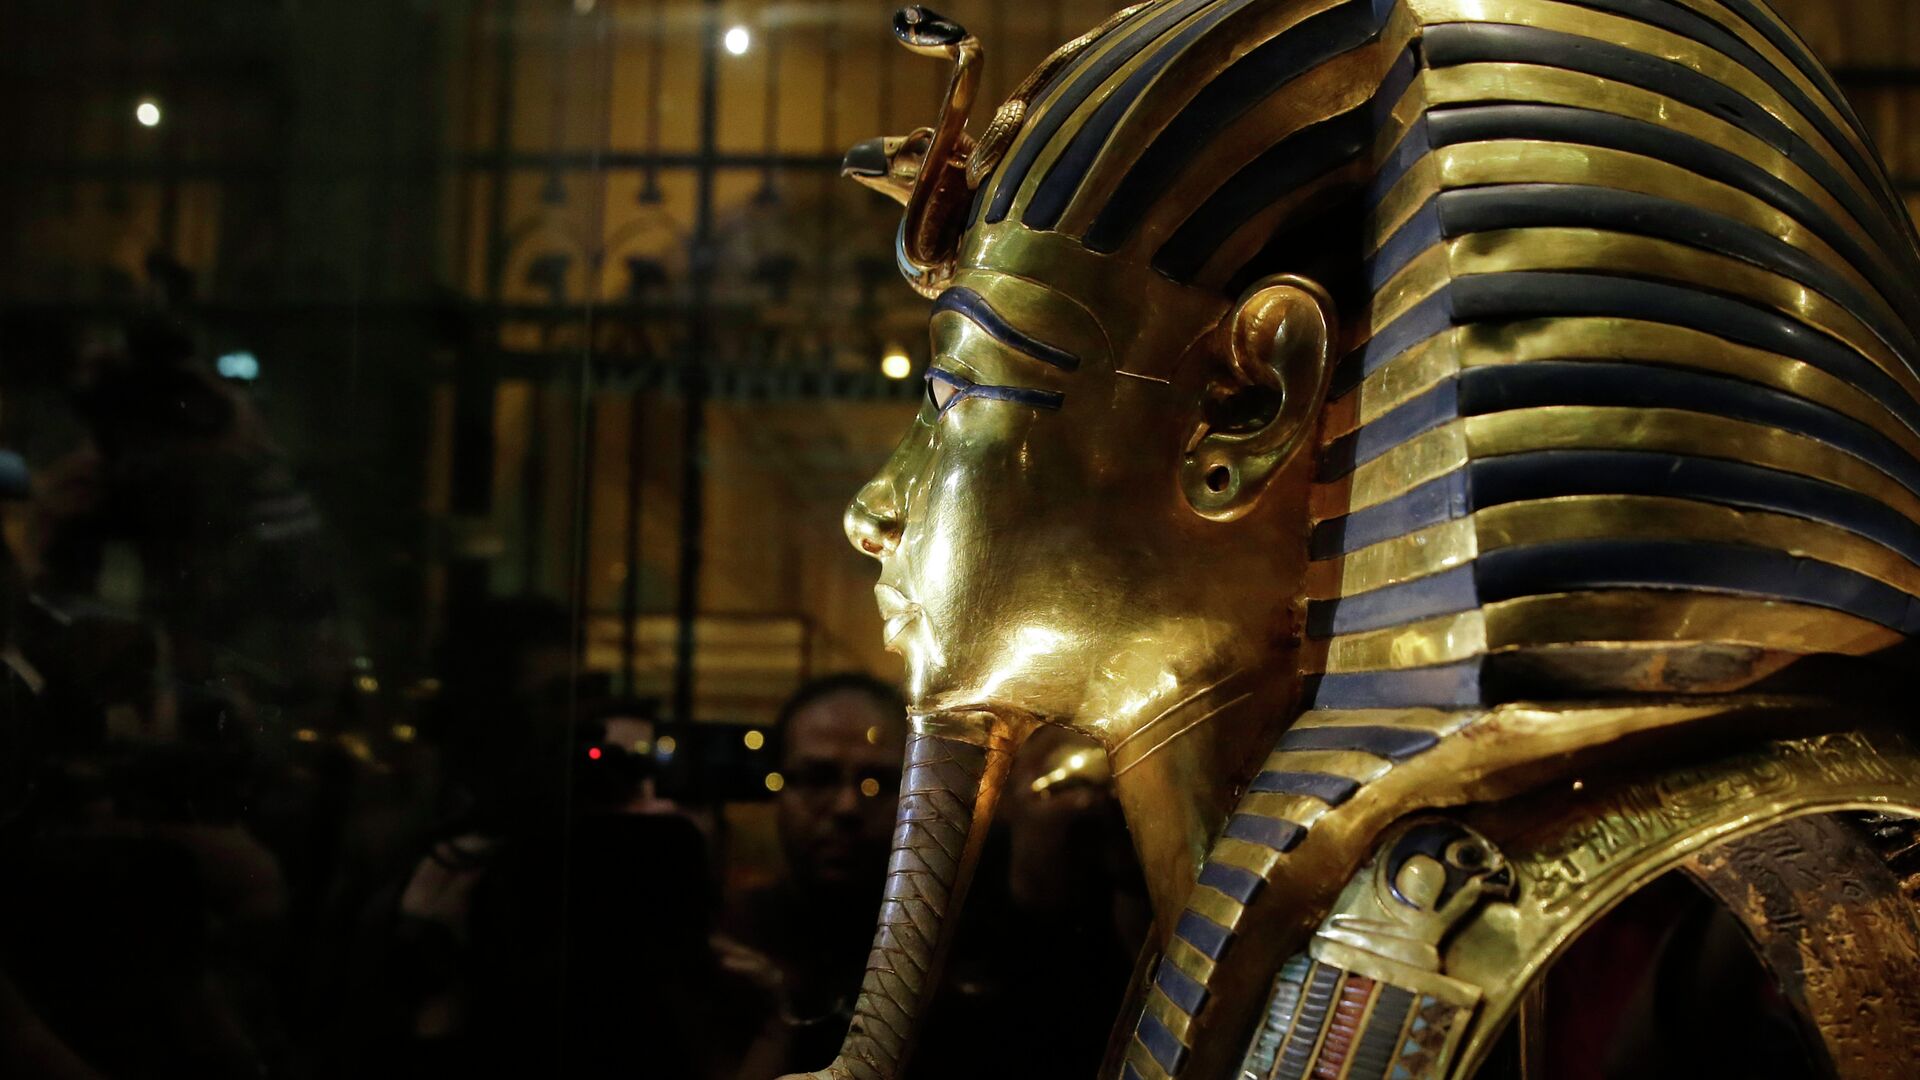 The gold mask of King Tutankhamun is seen in a glass case during a press tour, in the Egyptian Museum near Tahrir Square, Cairo, Egypt, Saturday, Jan. 24, 2015 - Sputnik International, 1920, 26.03.2022